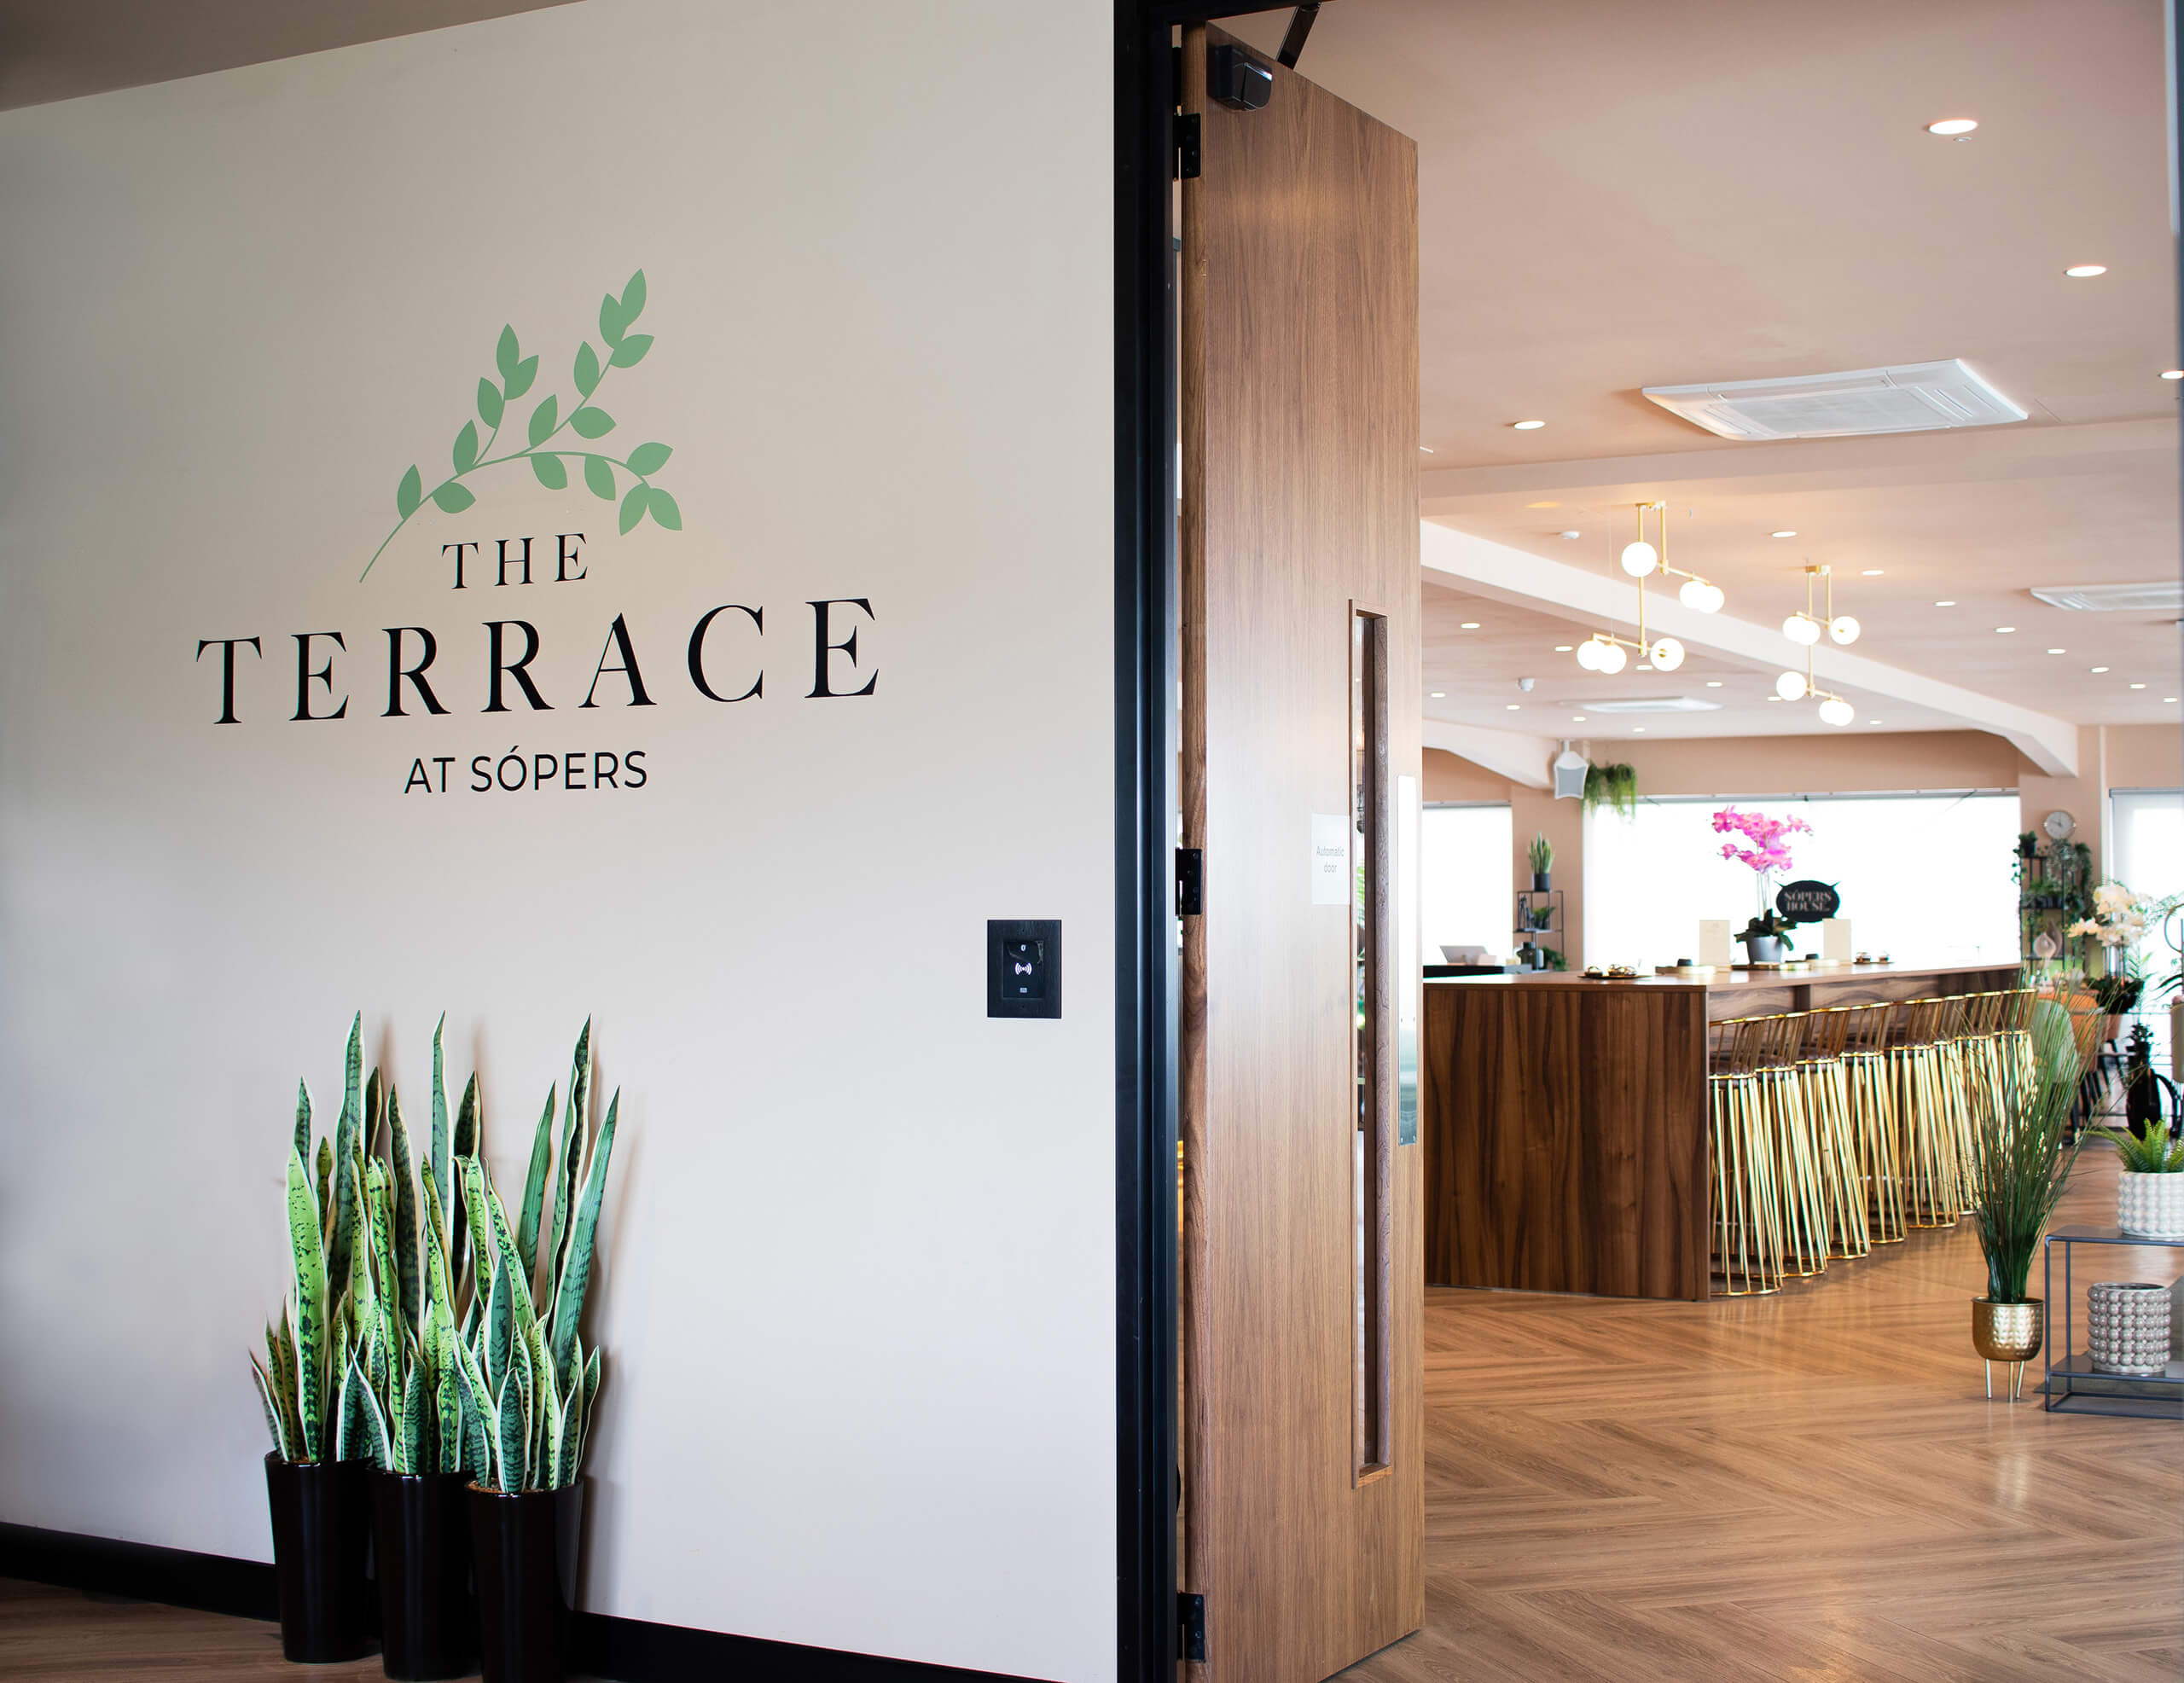 The logo at the entrance to The Terrace at Sopers